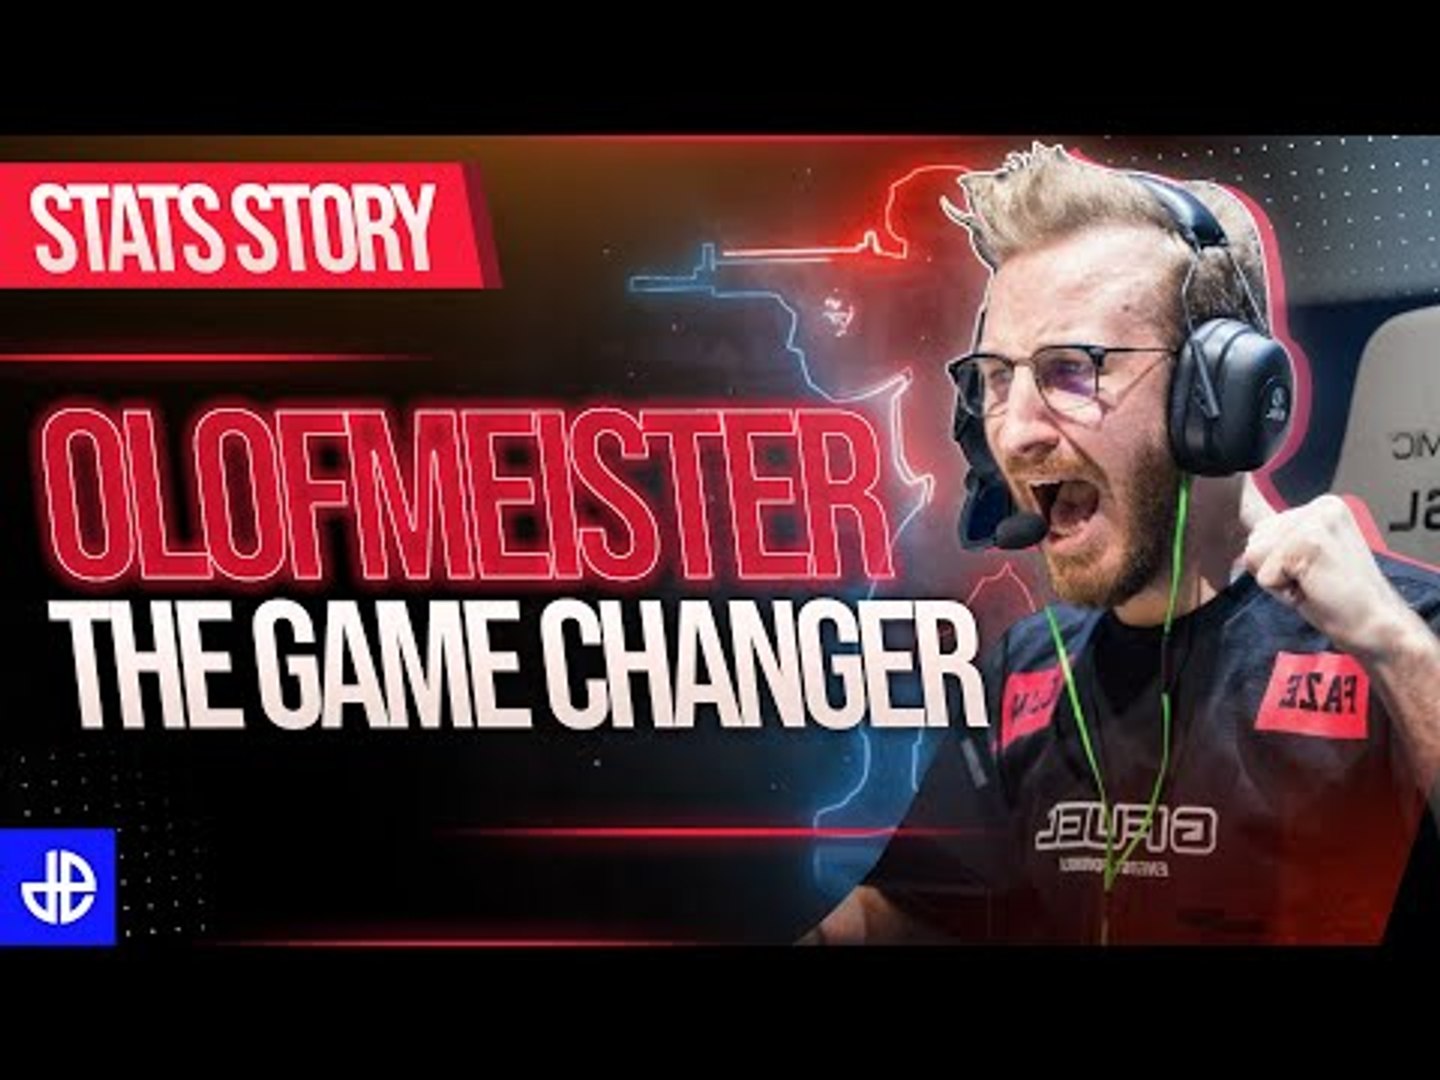 The Stats That Made Olofmeister A GAME CHANGER - video Dailymotion